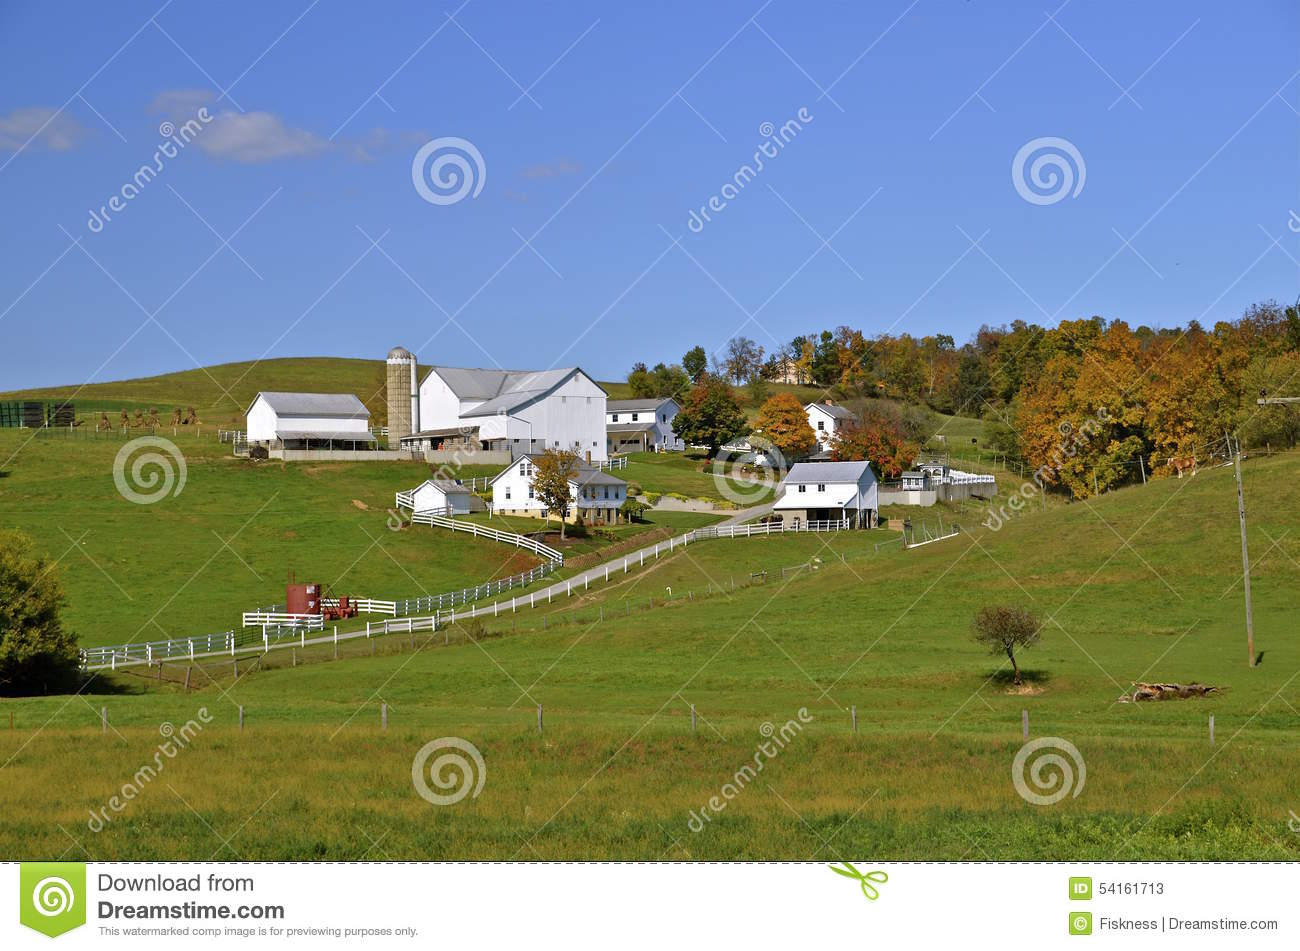 The Beauty Of An Amish Farm In The Distance Of The Rolling Hills